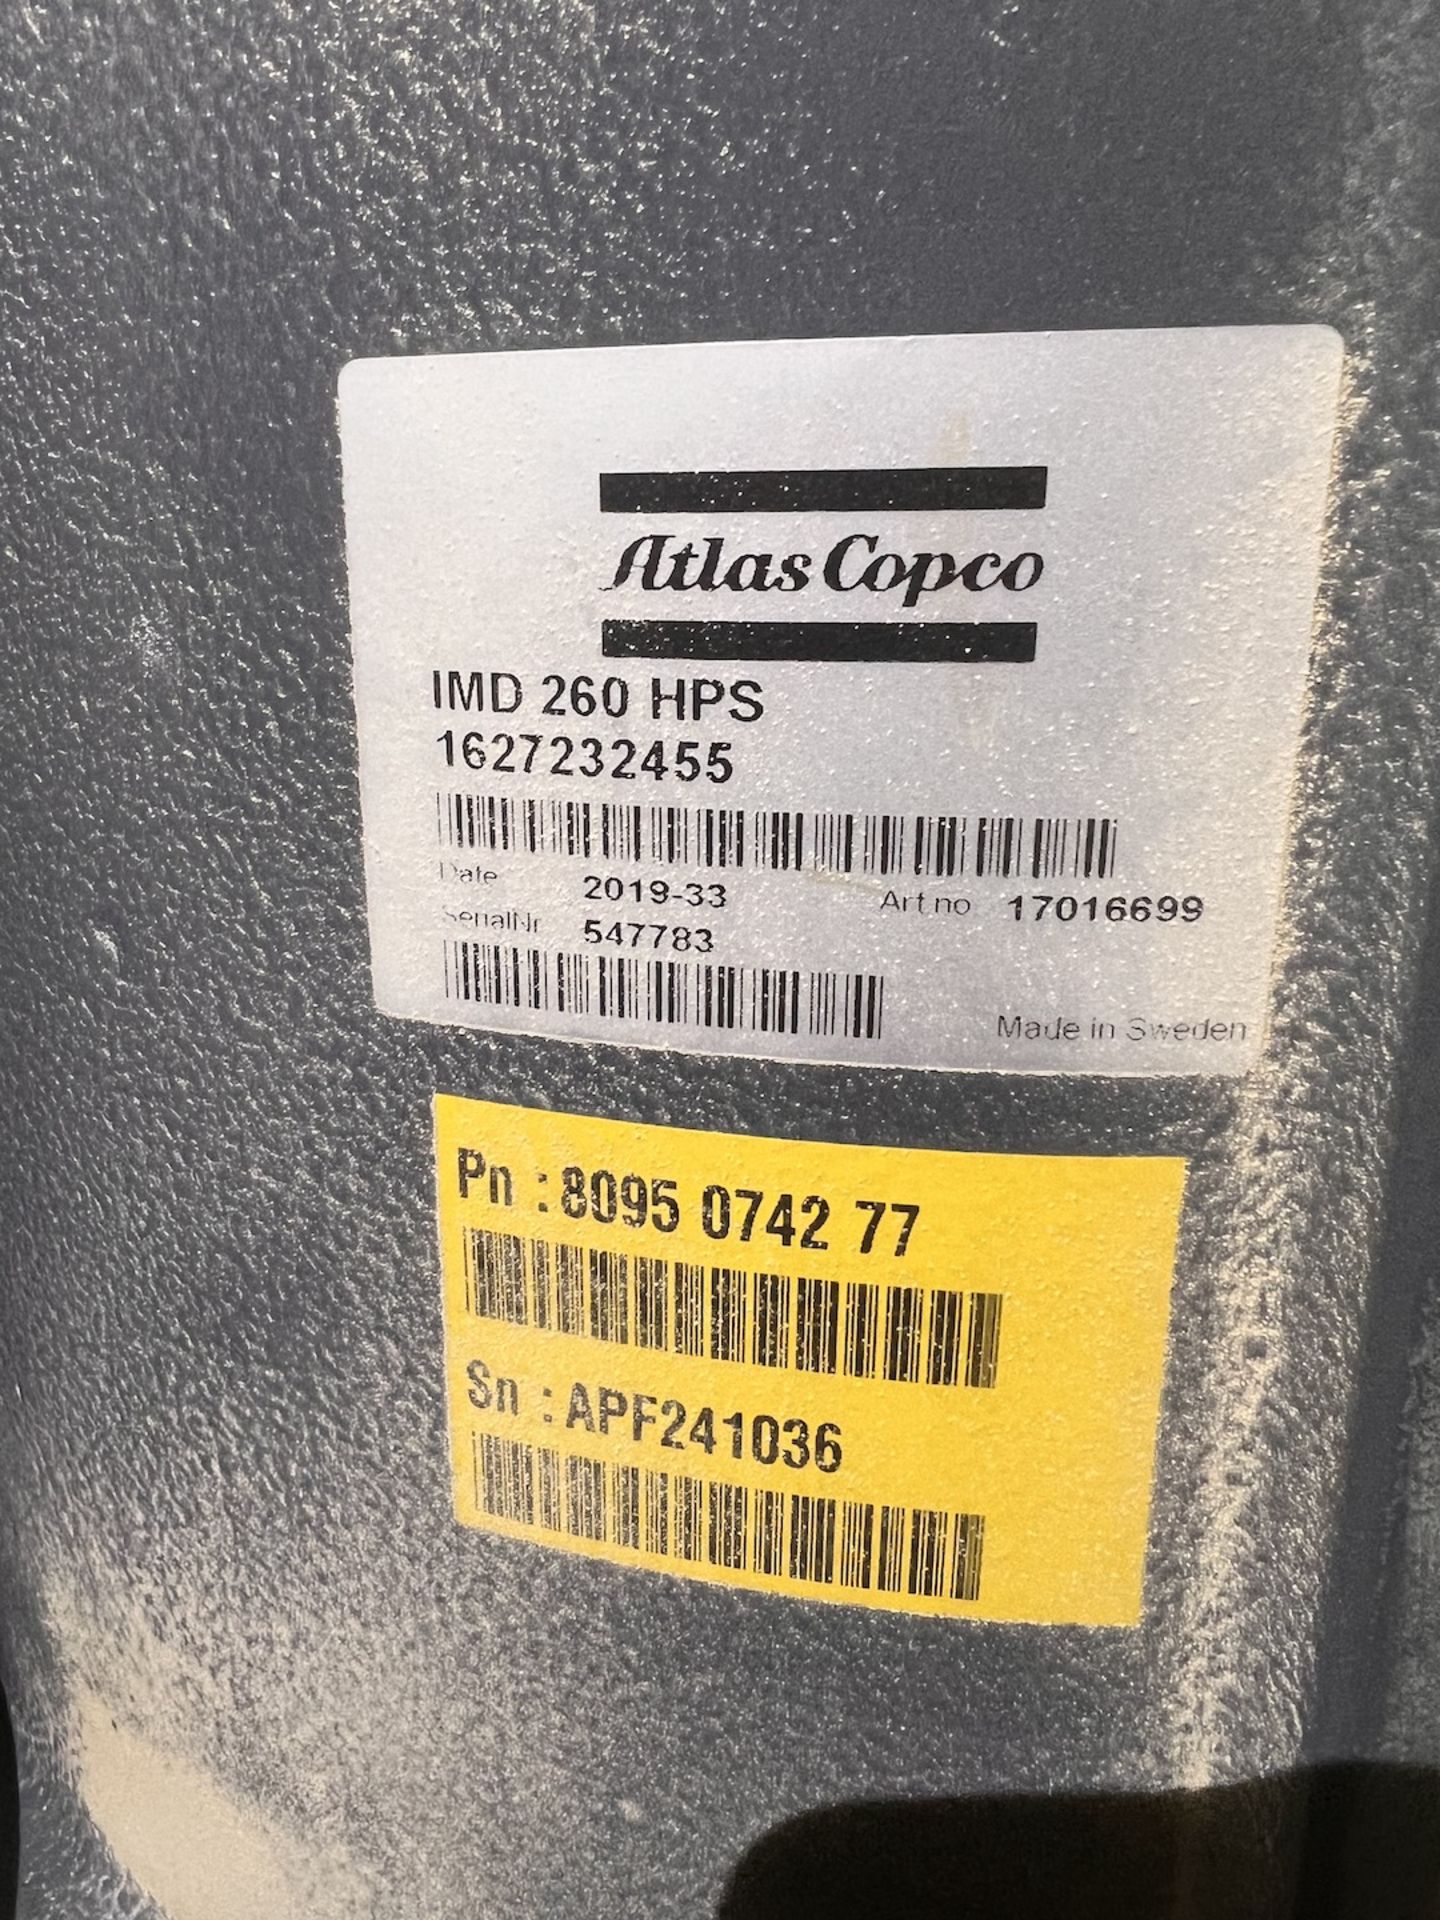 2019 ATLAS COPCO AIR COMPRESSOR, MODEL ZT90VSD-FF, S/N AIA 0116669, APPROX. 17,404 HOURS, IMD 260 - Image 25 of 26